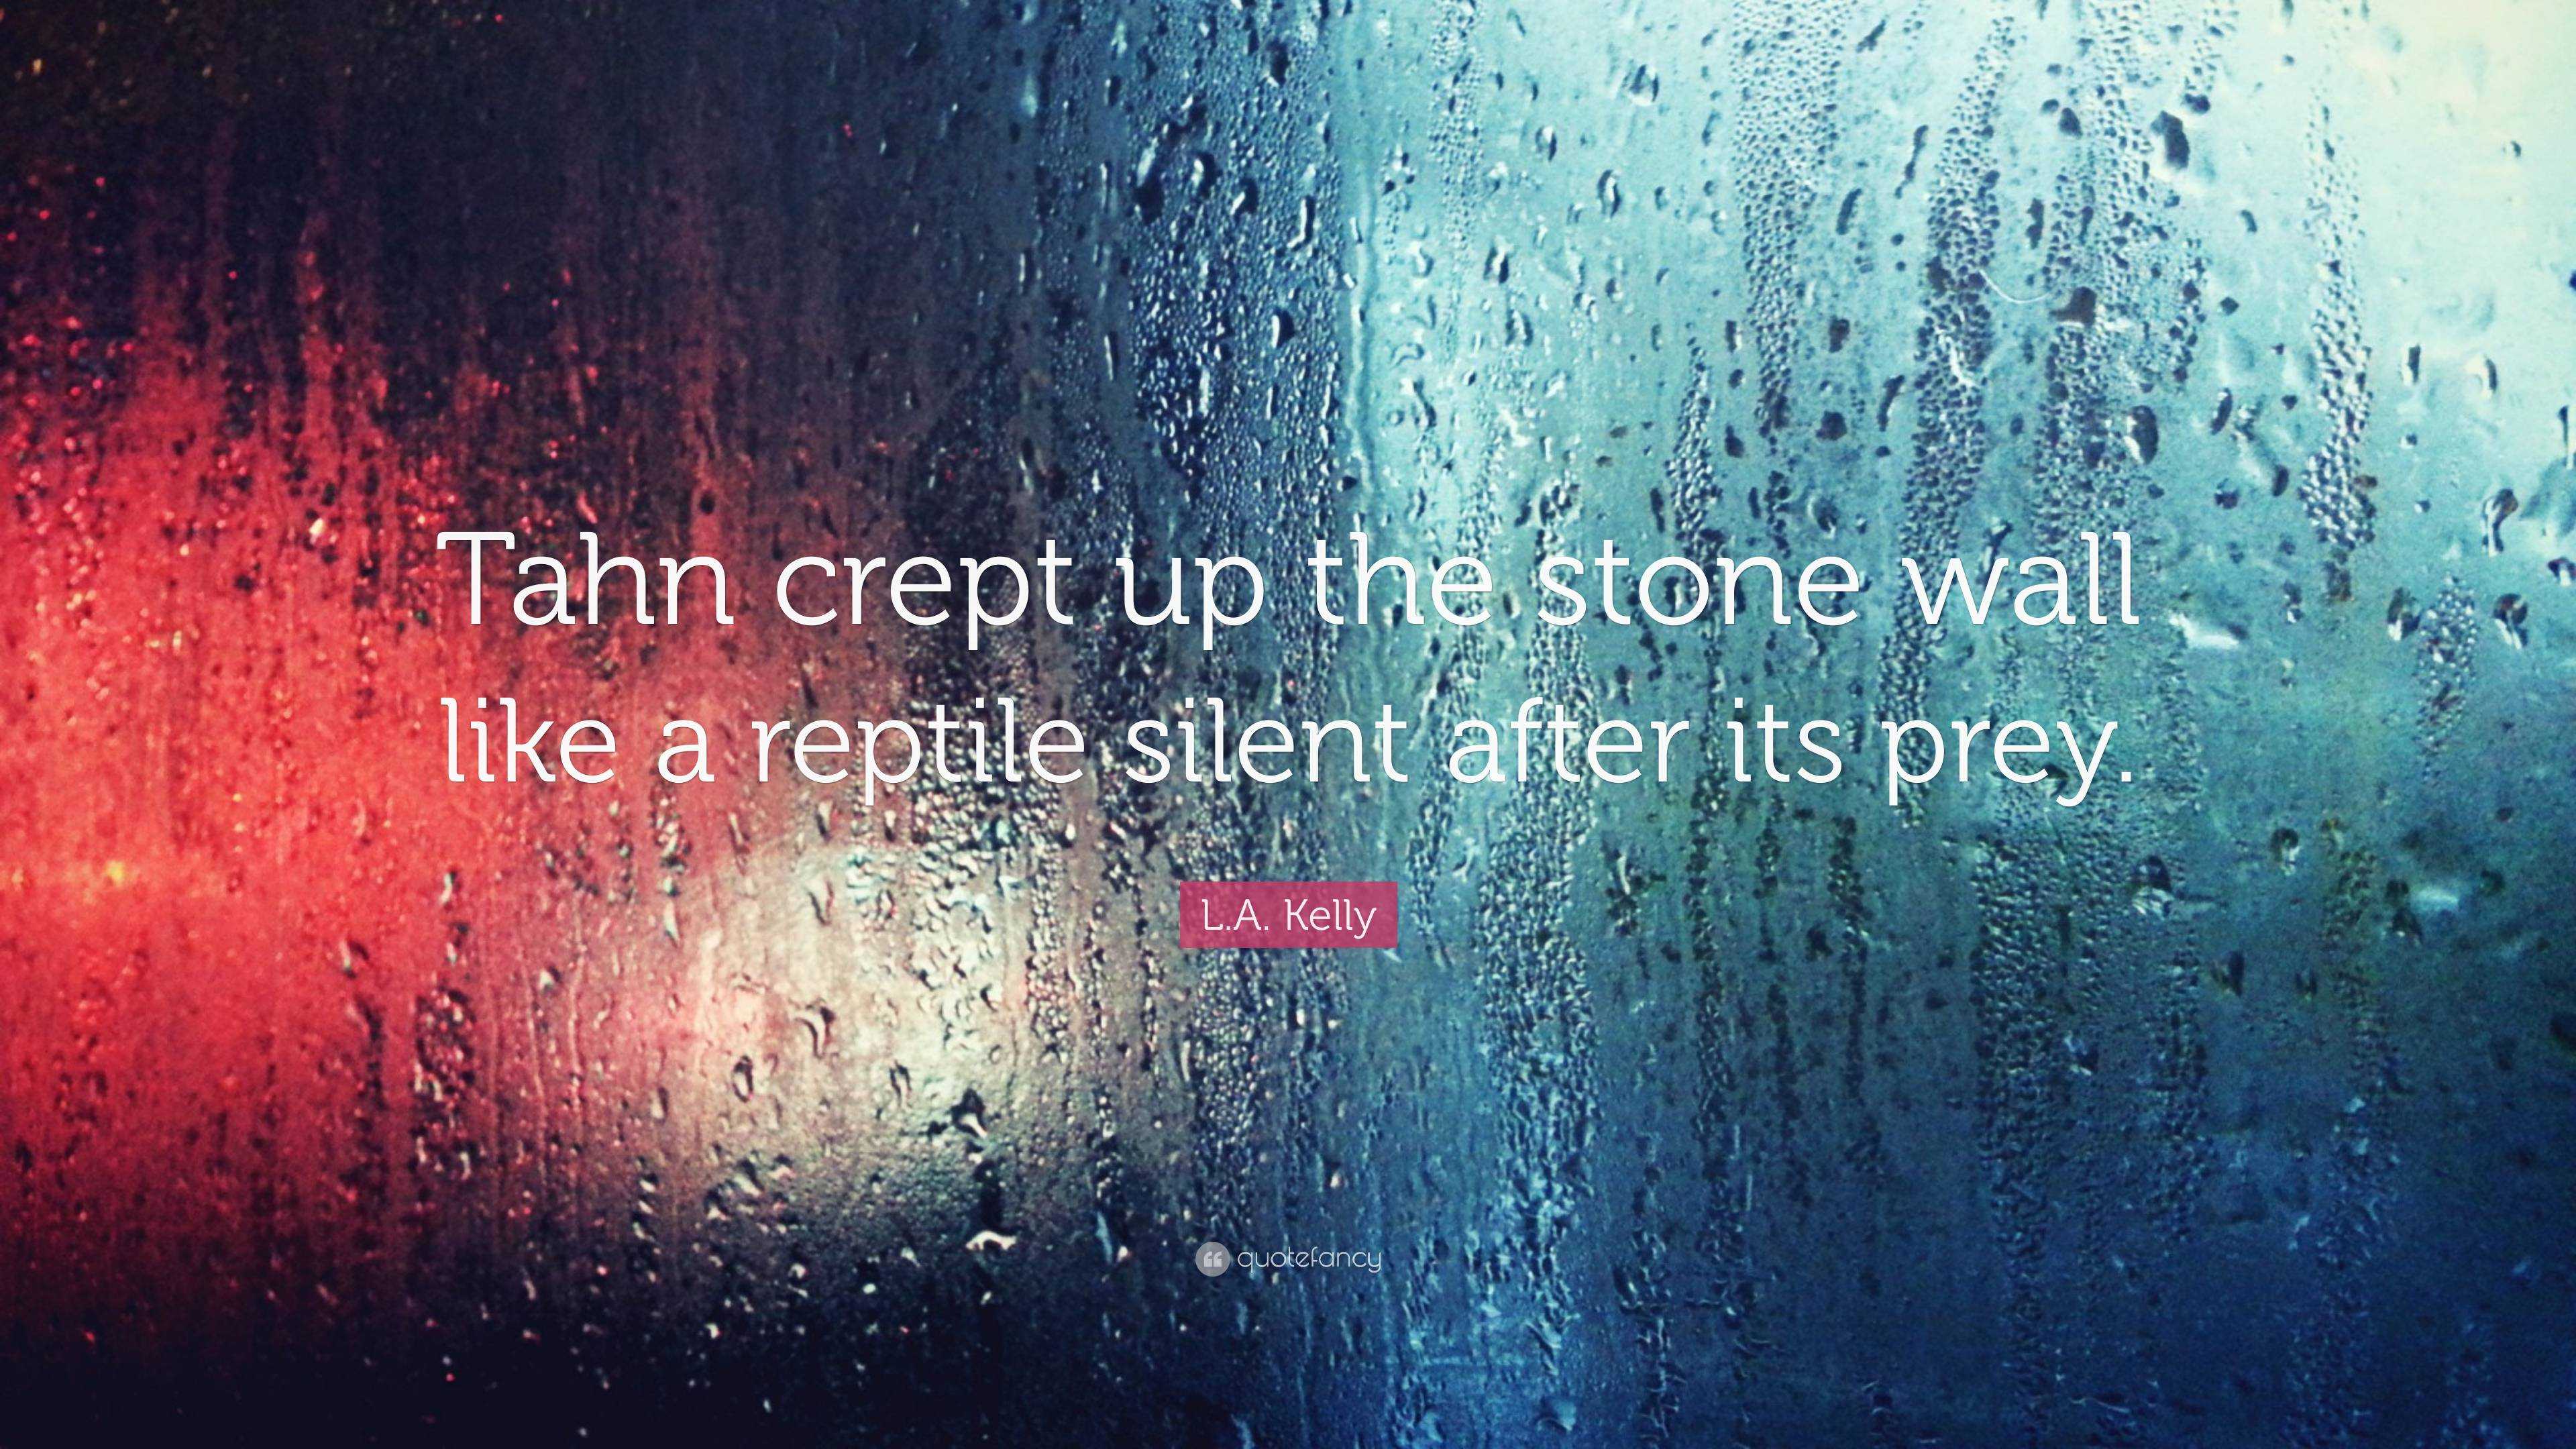 L A Kelly Quote Tahn Crept Up The Stone Wall Like A Reptile Silent After Its Prey